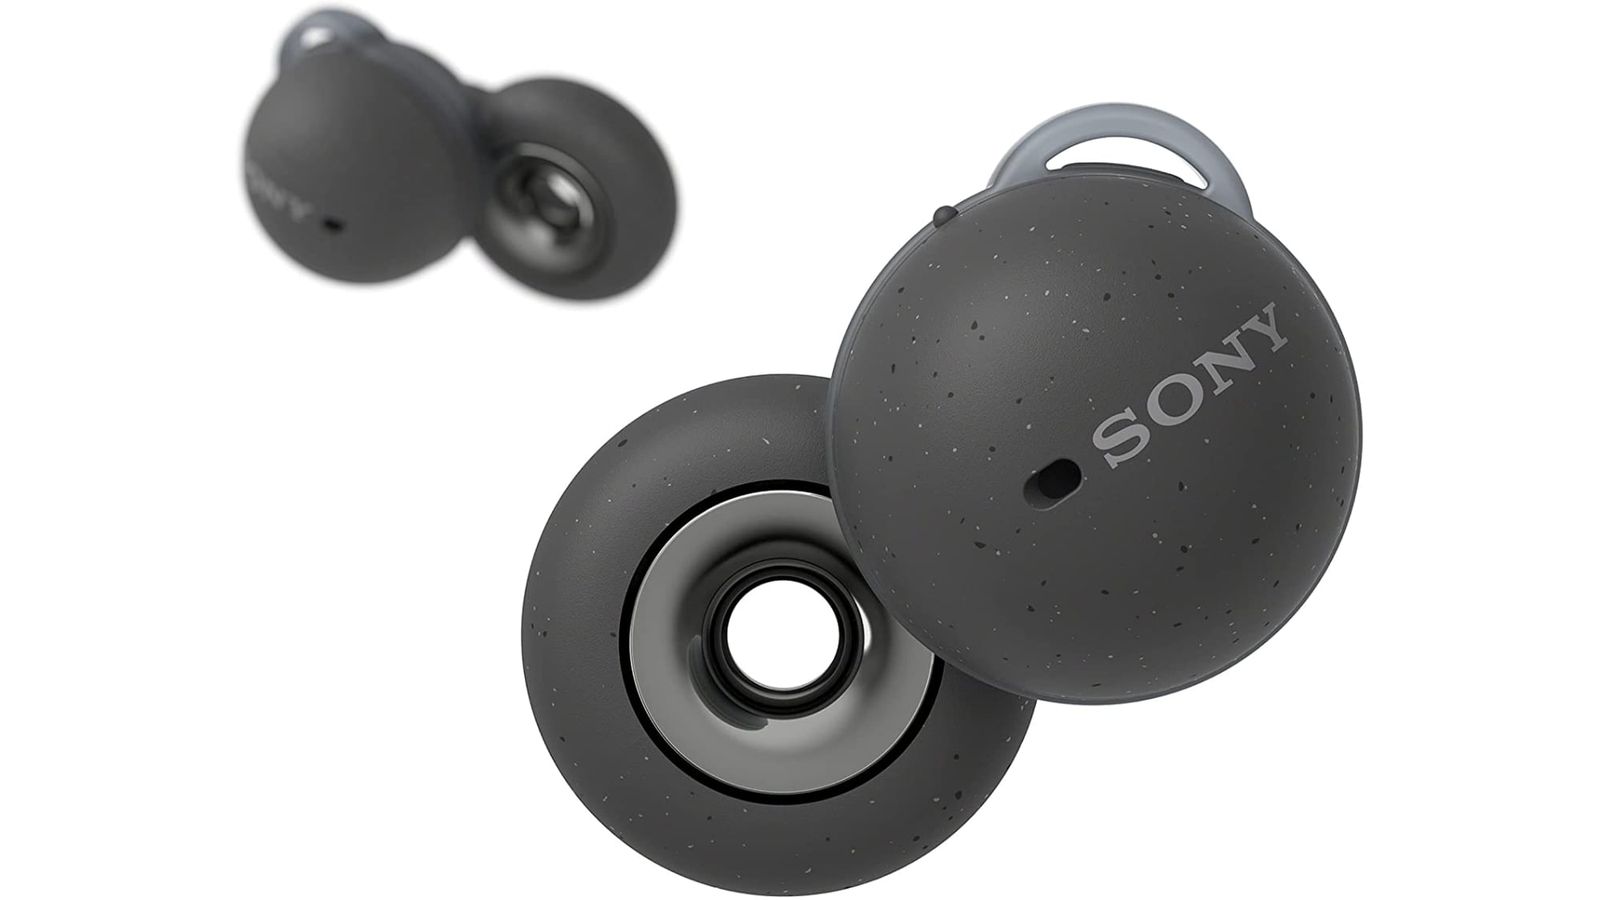 Sony Announces ‘LinkBuds’ With Open Design to Let in Ambient Sound – Hookup Cellular | News